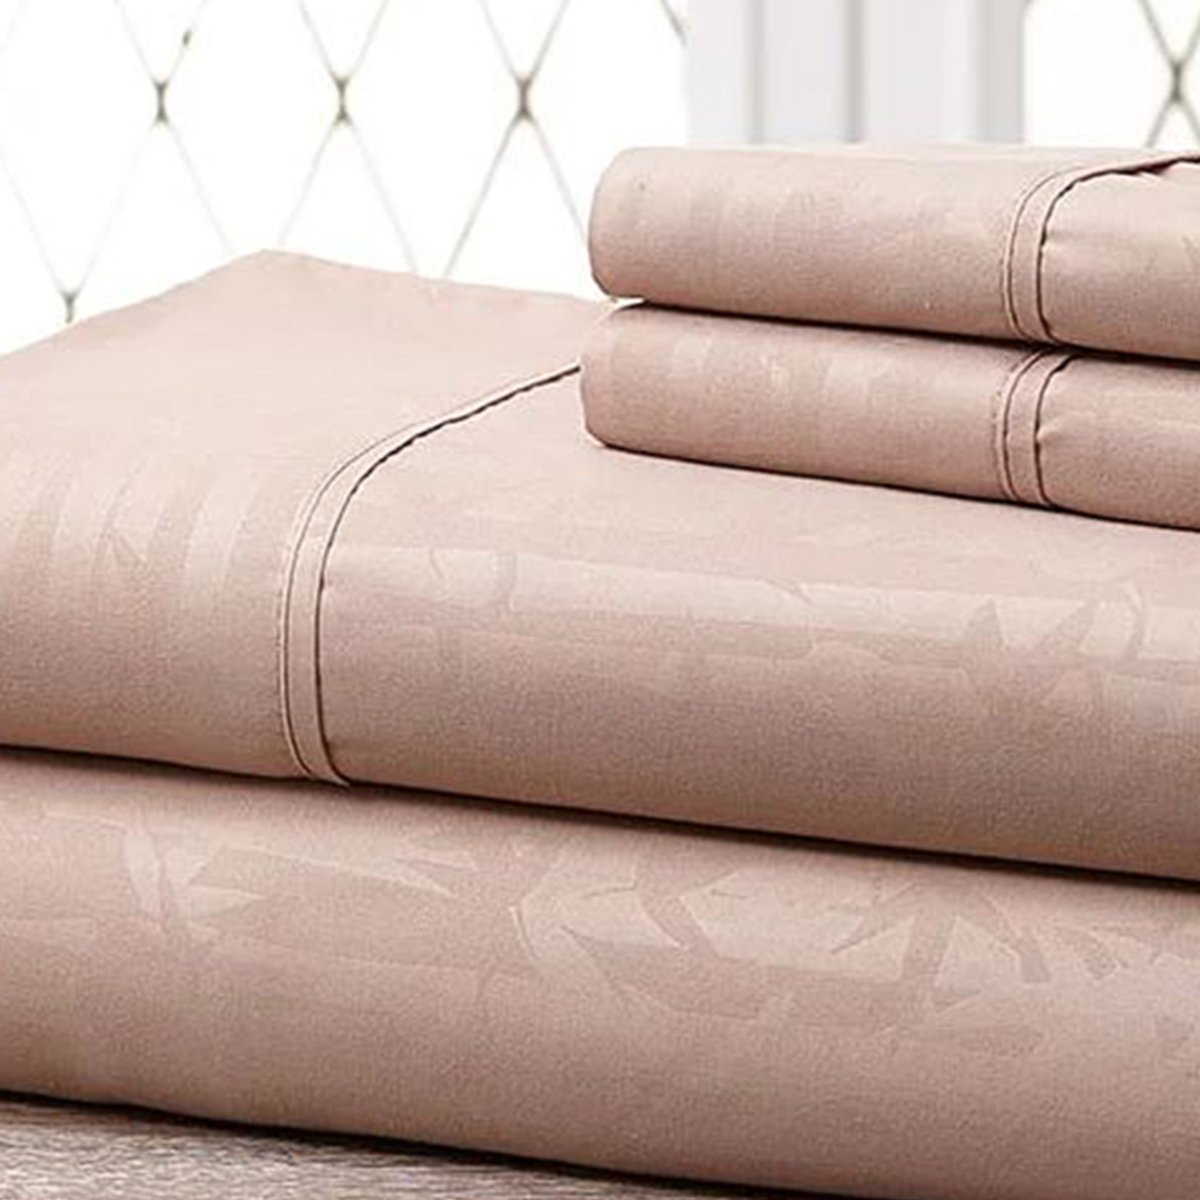 Hny-4pc-eb-tau-k Super-soft 1600 Series Bamboo Embossed Bed Sheet, Taupe - King, 4 Piece